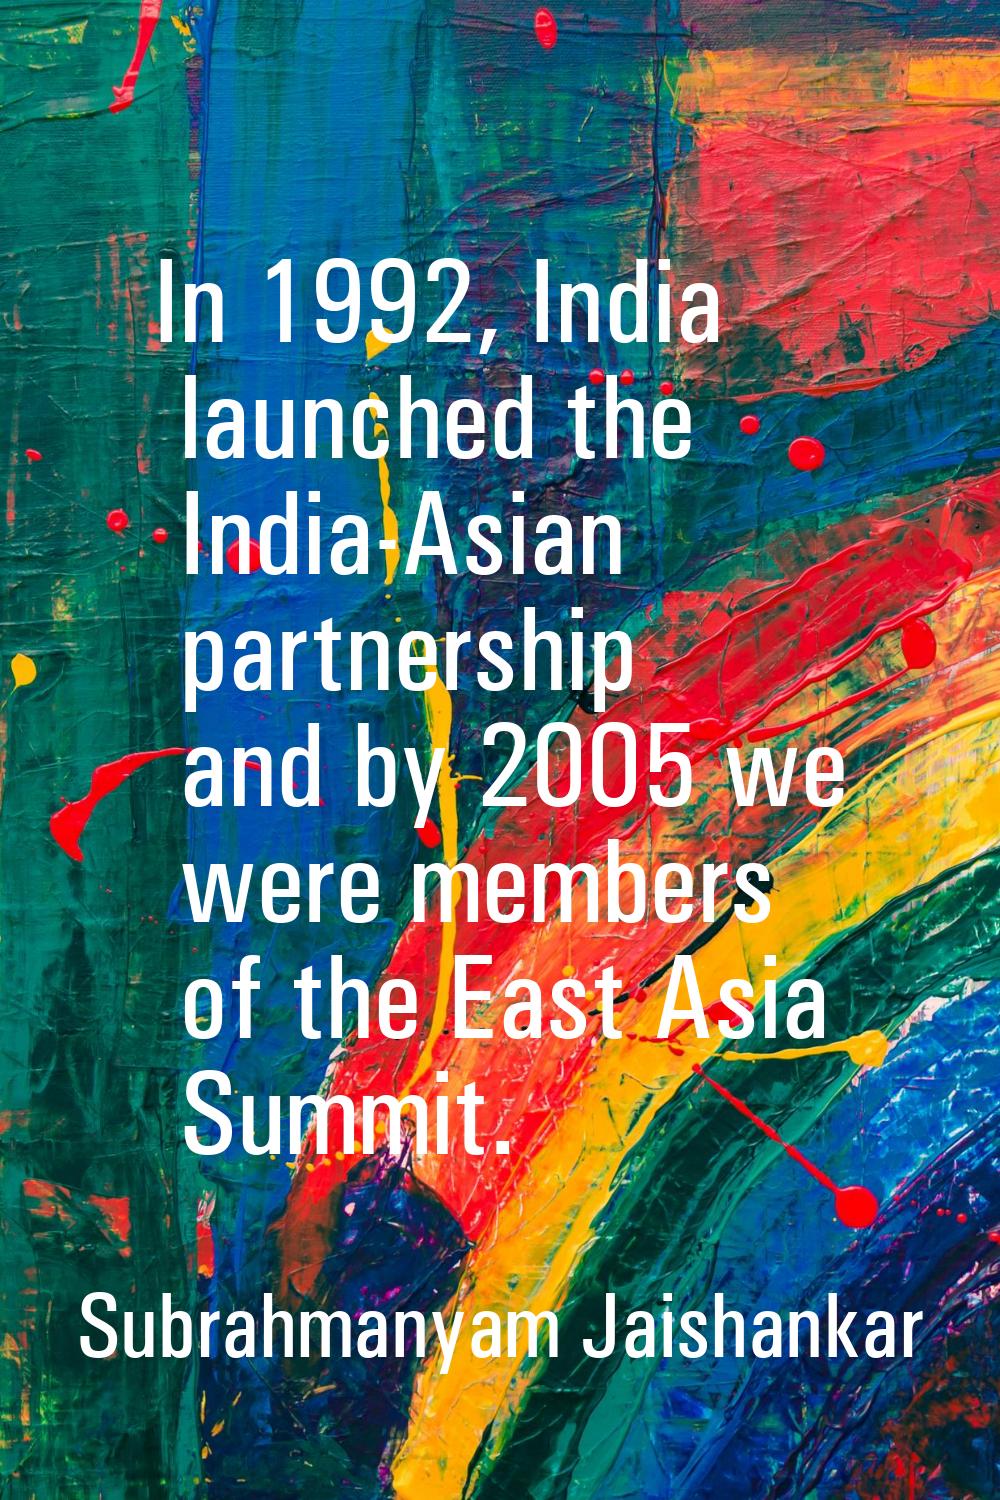 In 1992, India launched the India-Asian partnership and by 2005 we were members of the East Asia Su